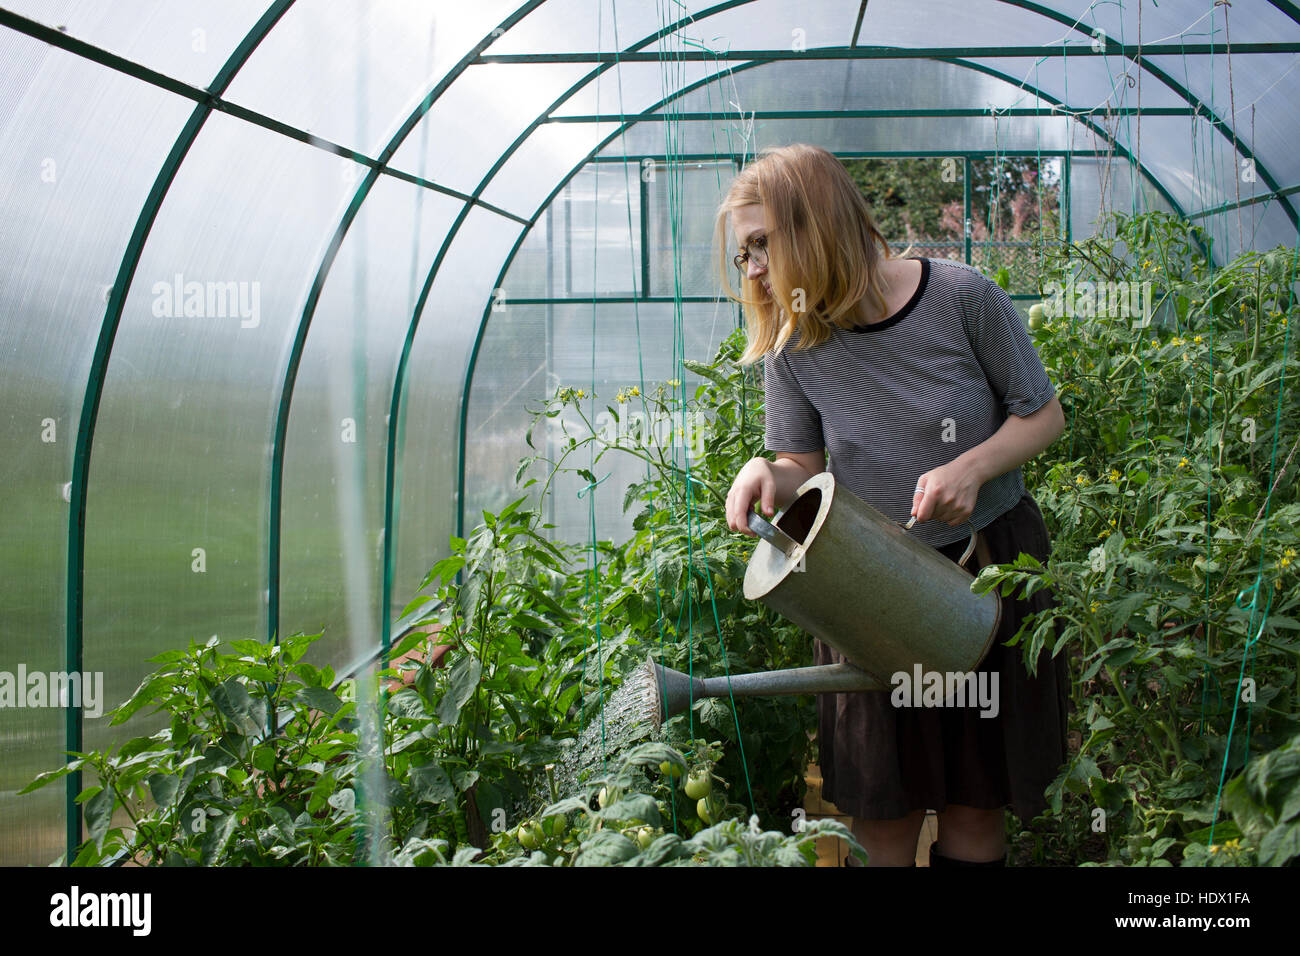 Caucasian woman watering greenhouse with watering can Stock Photo